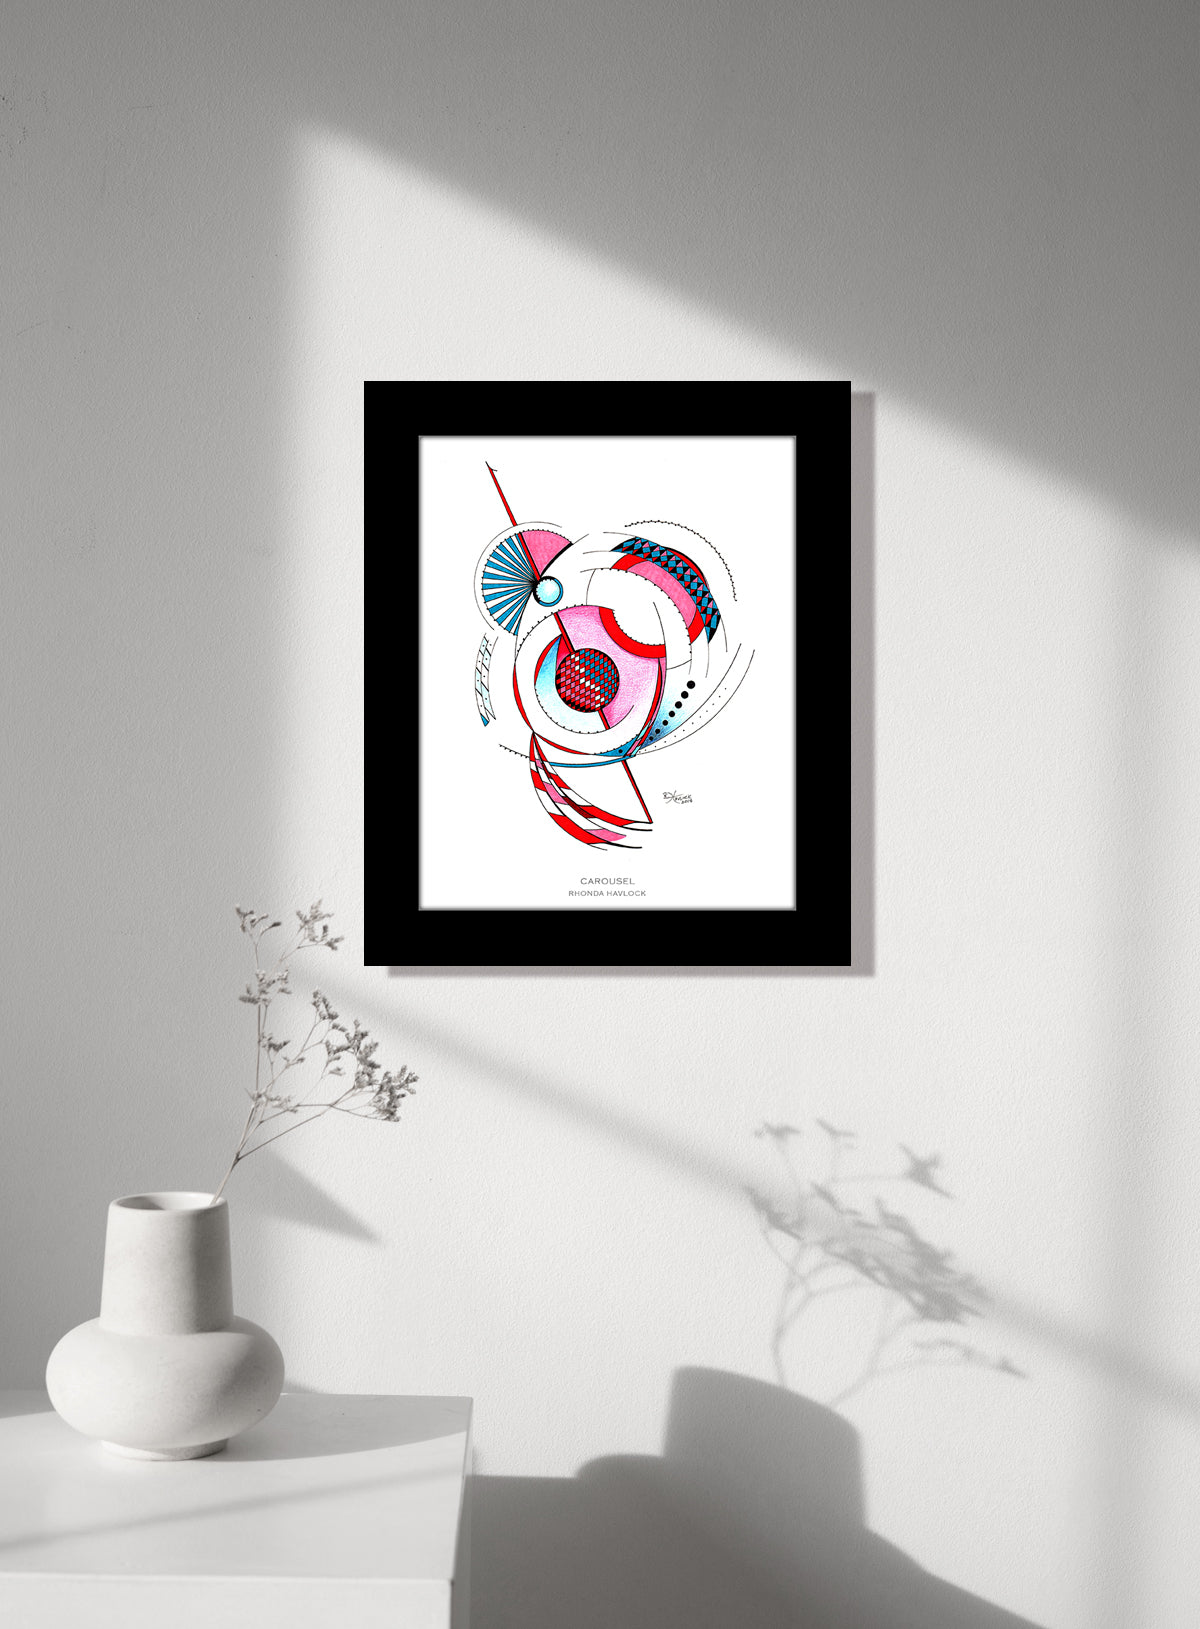 CAROUSEL ~ Abstract Geometry - 8x10 Print in Collector's Sleeve